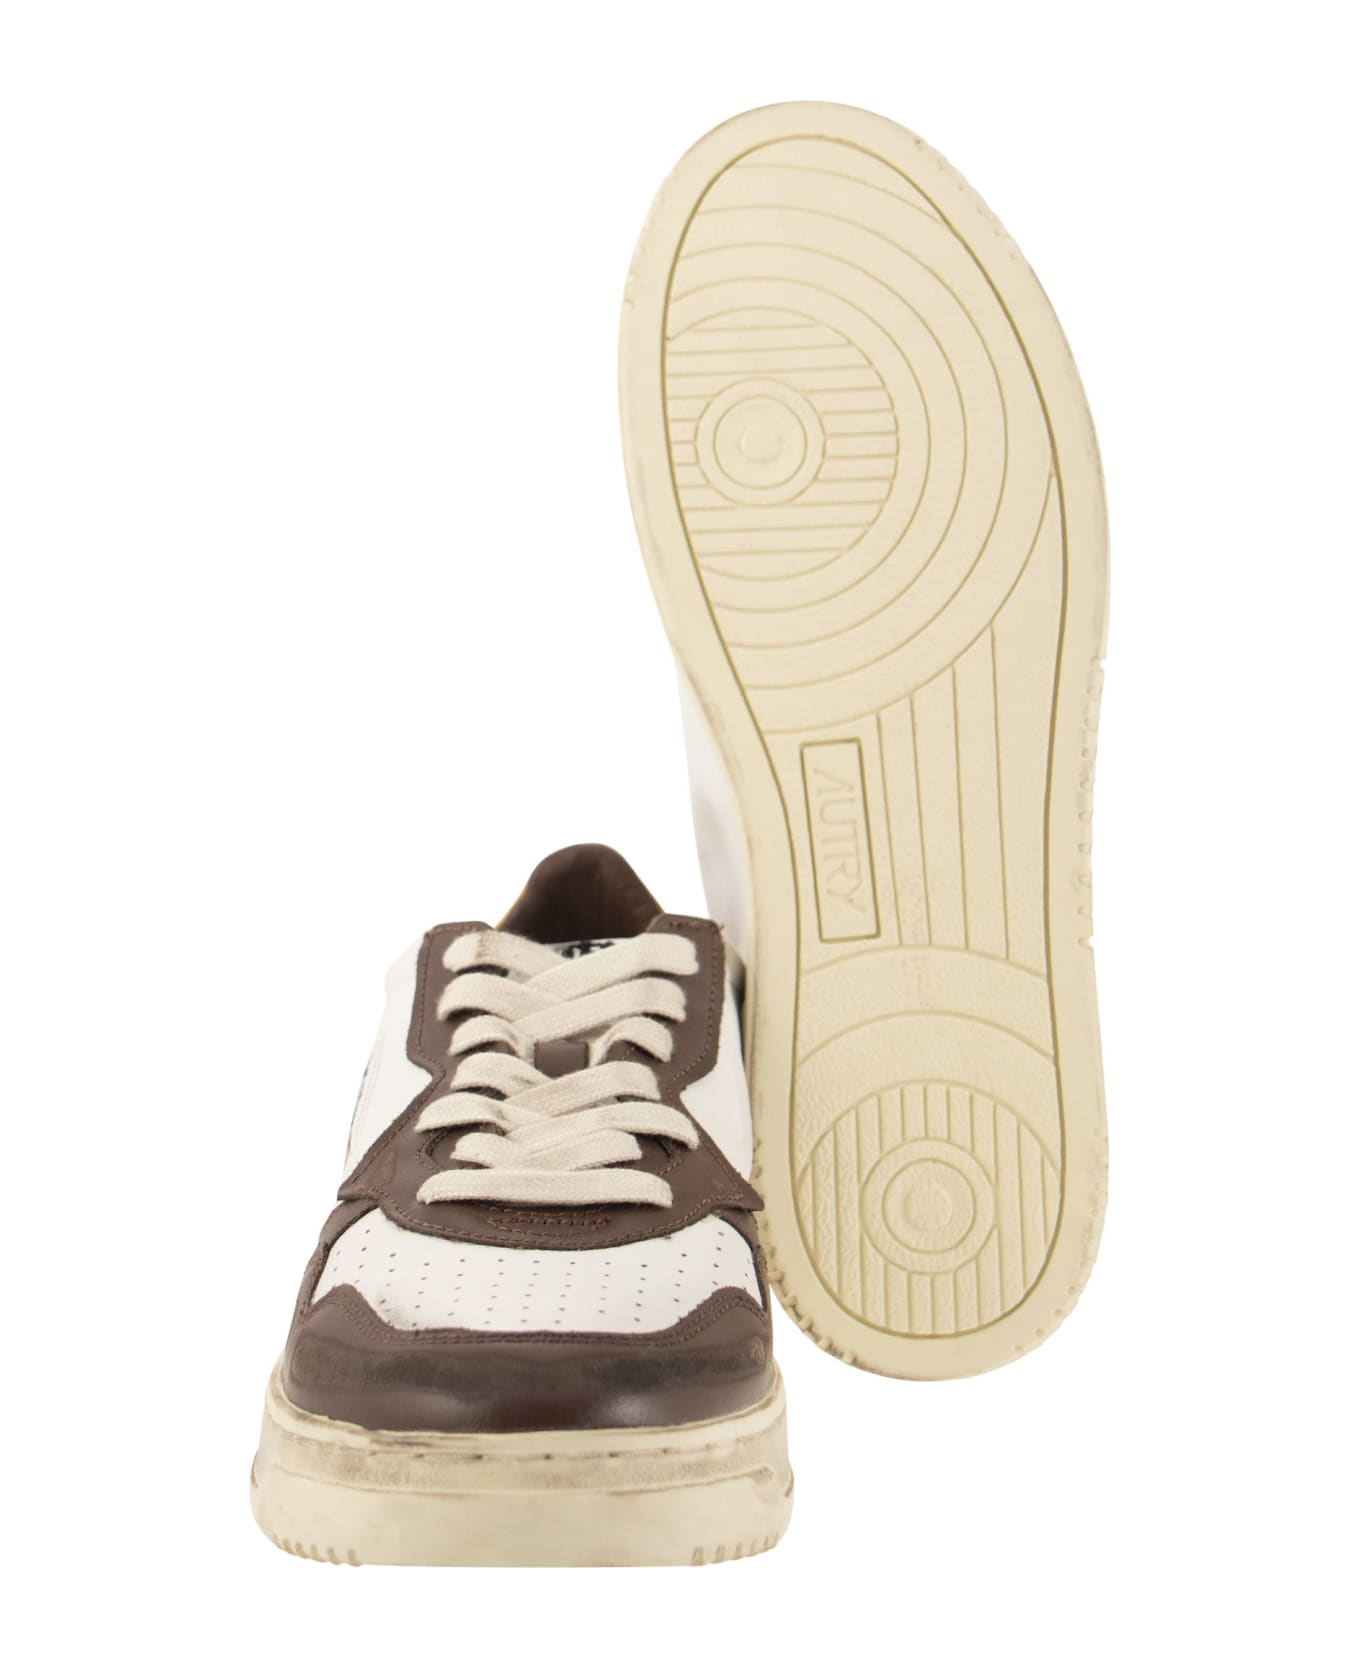 Autry Sneakers In Super Vintage Leather - White